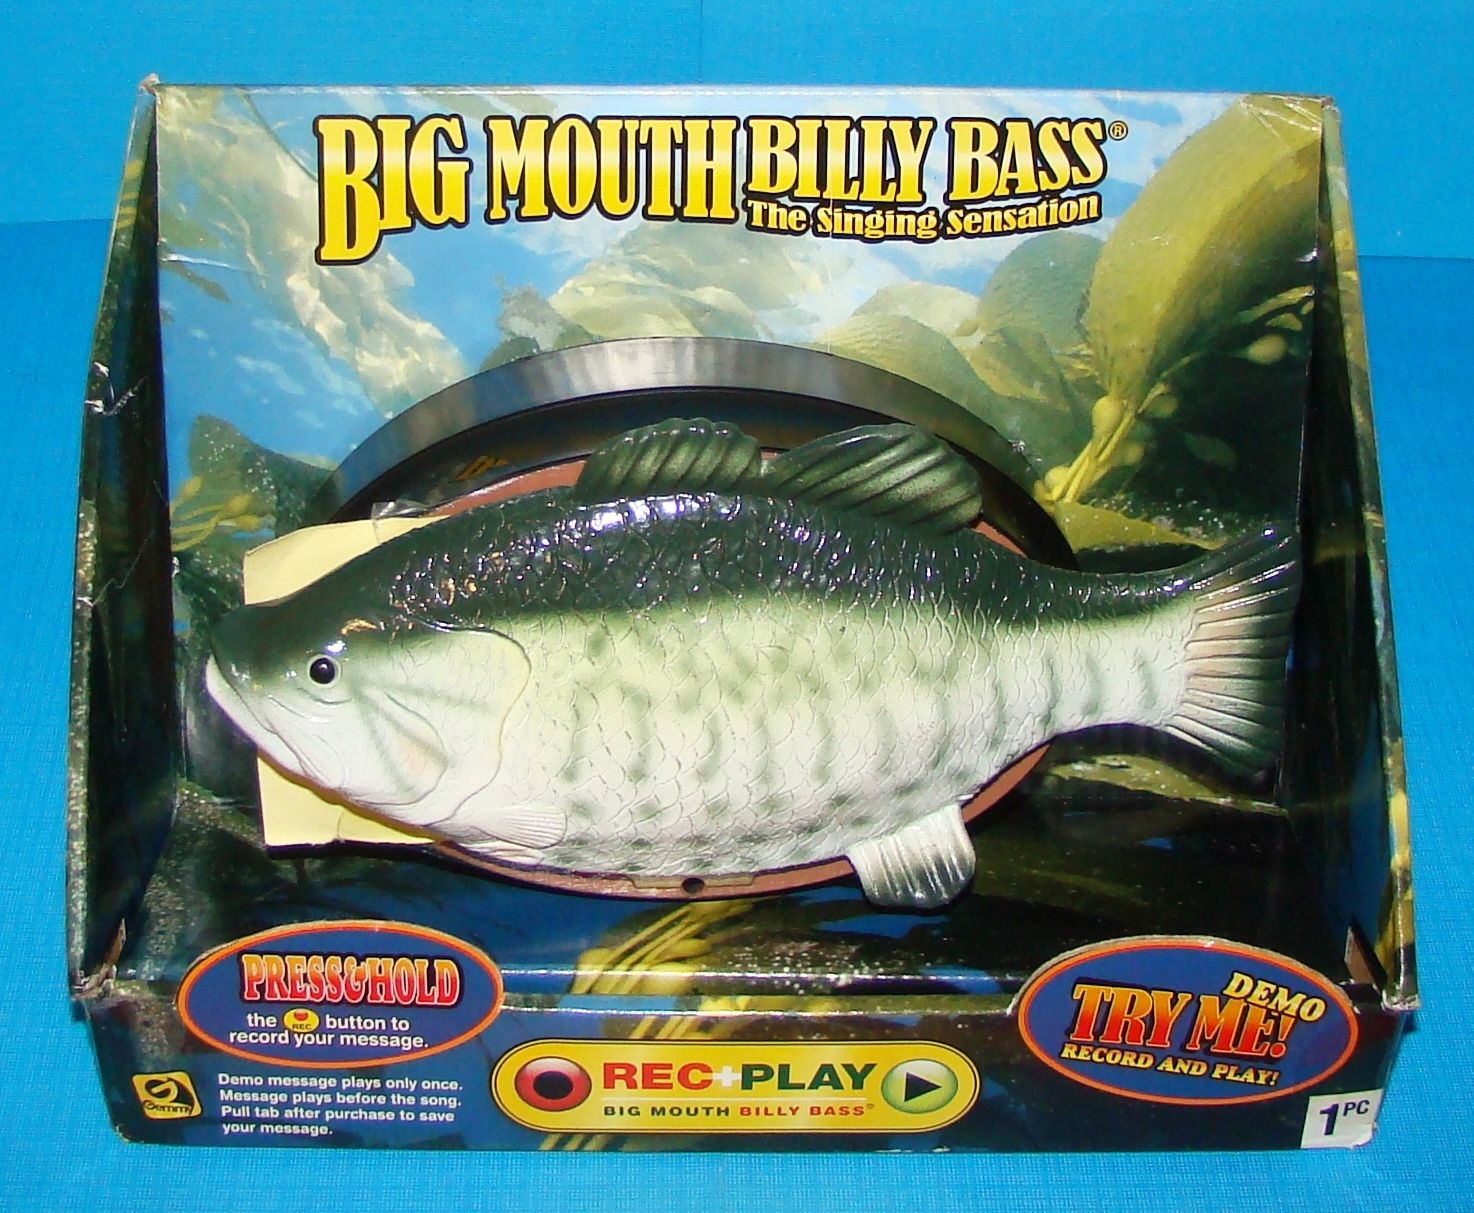 NEW 1998 Big Mouth Billy Bass Motion Activated Singing Fish Original Box Gemmy 